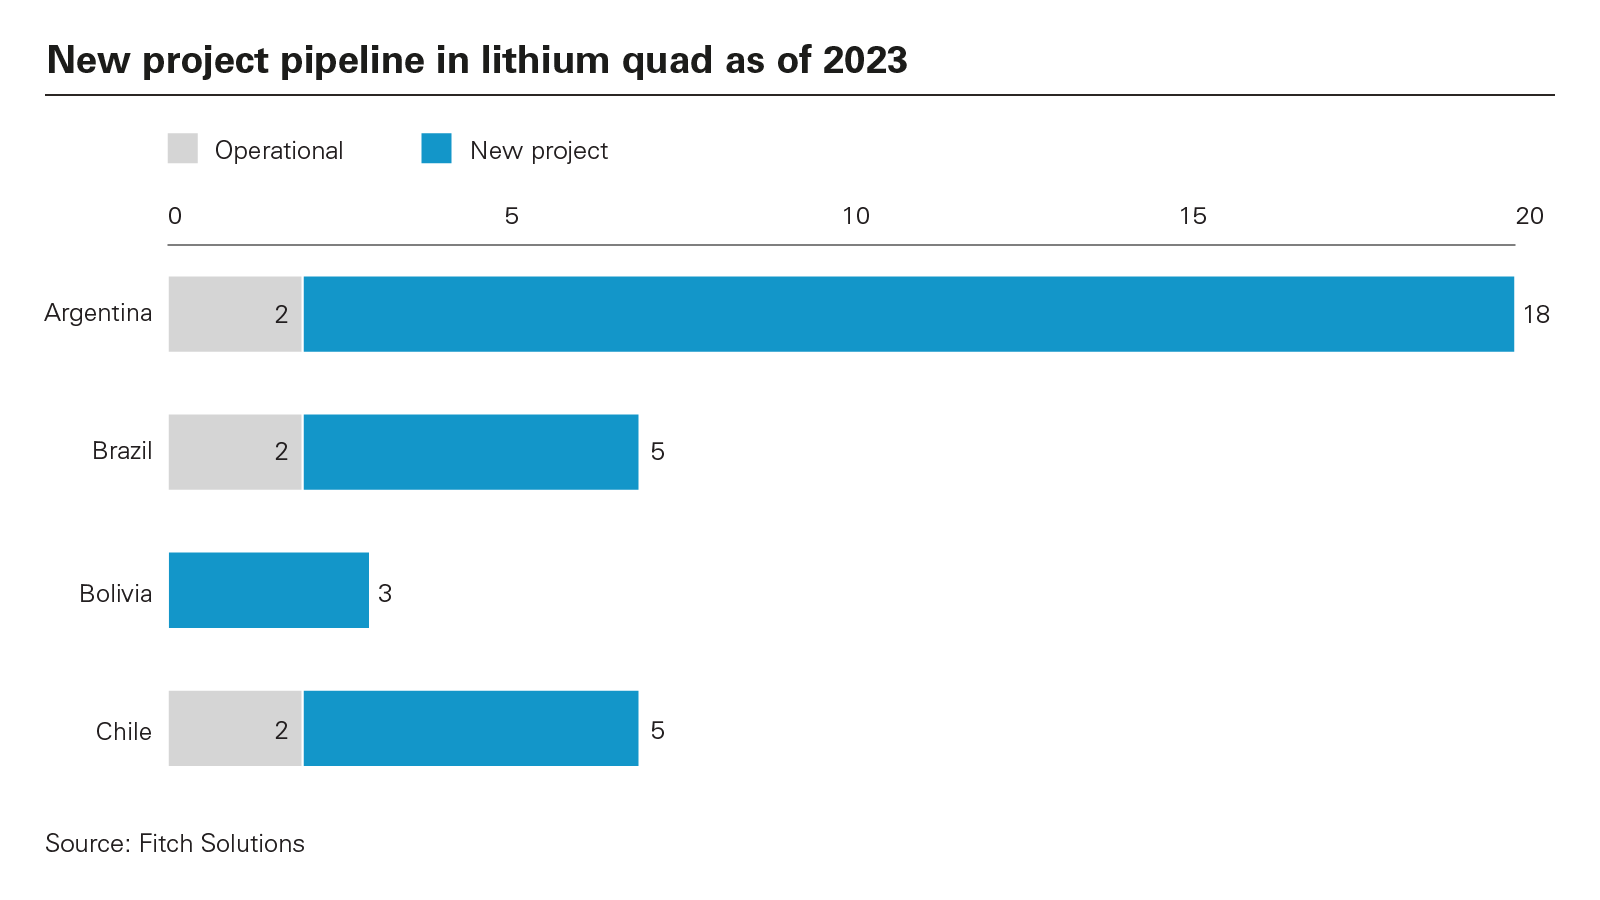 New project pipeline in lithium quad as of 2023